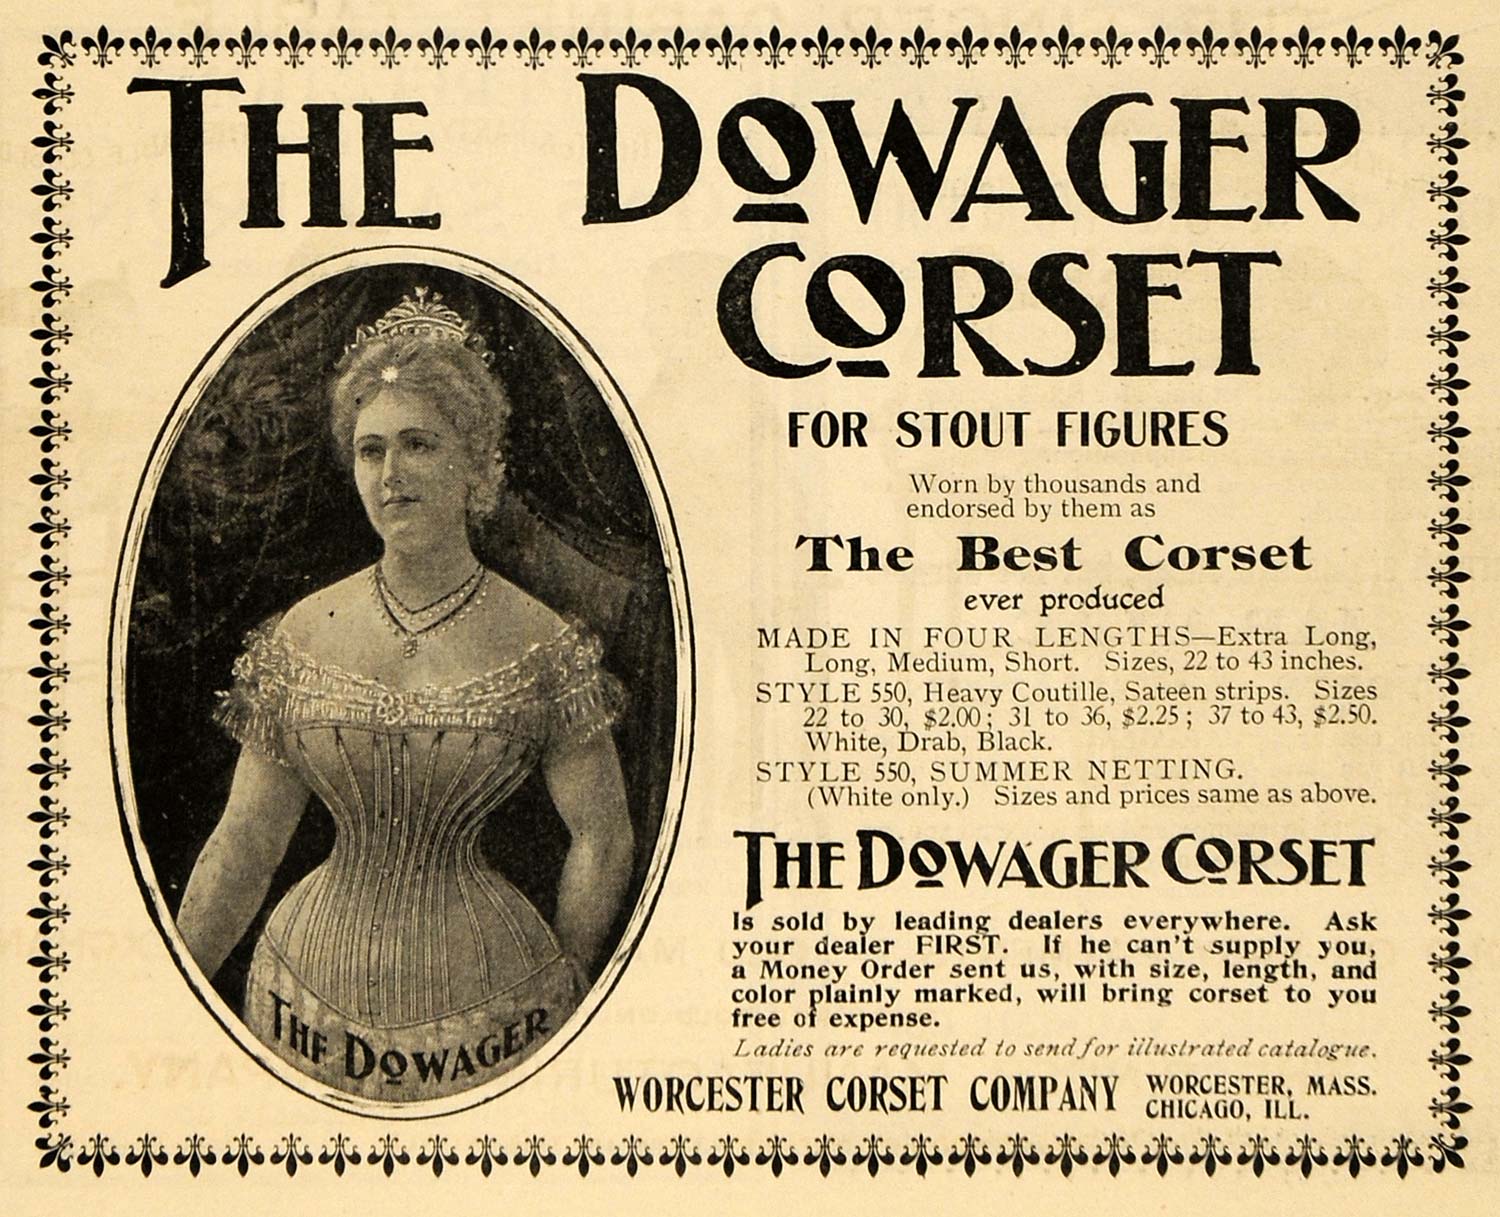 1900 Ad Worcester Corset Dowager Clothing Accessories - ORIGINAL TOM3